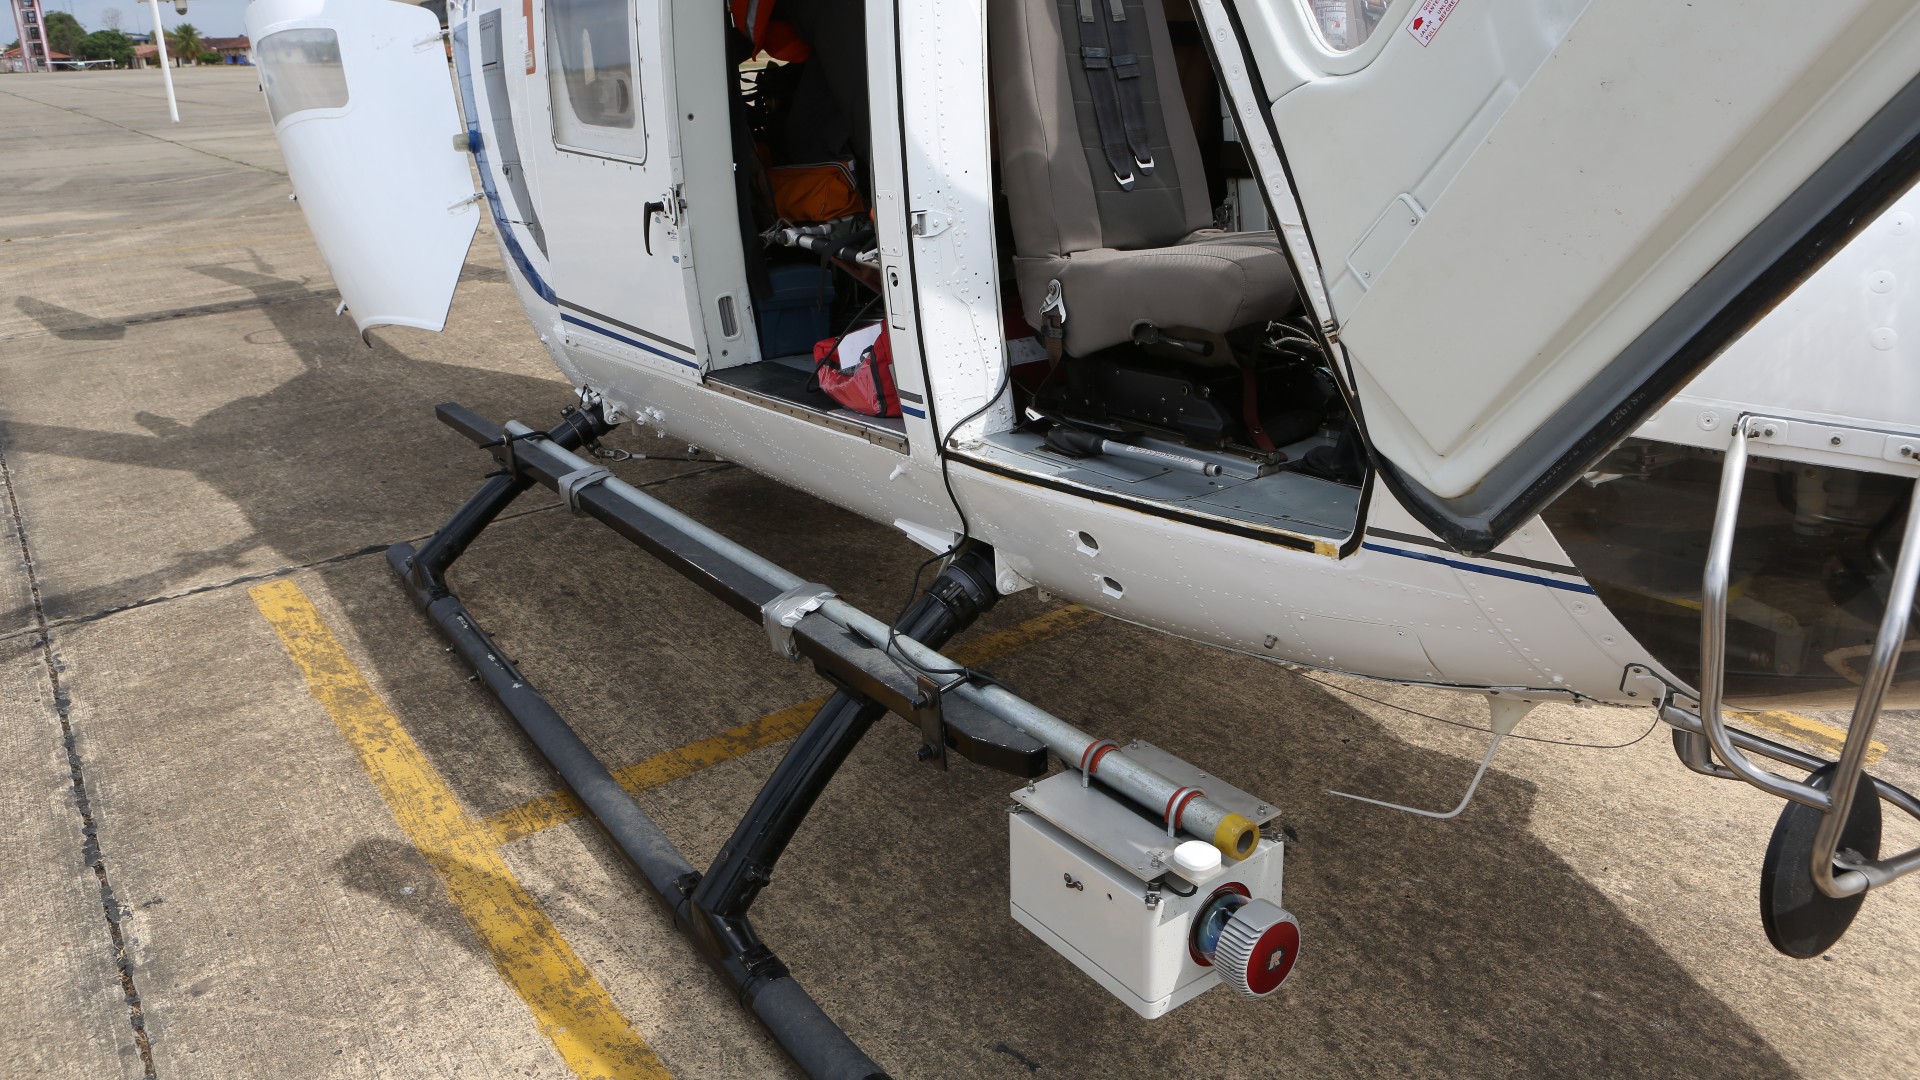 The Riegl VUX-1 scanner with a Trimble APX-15 UAV GNSS, attached to the Eurocopter AS350 helicopter.